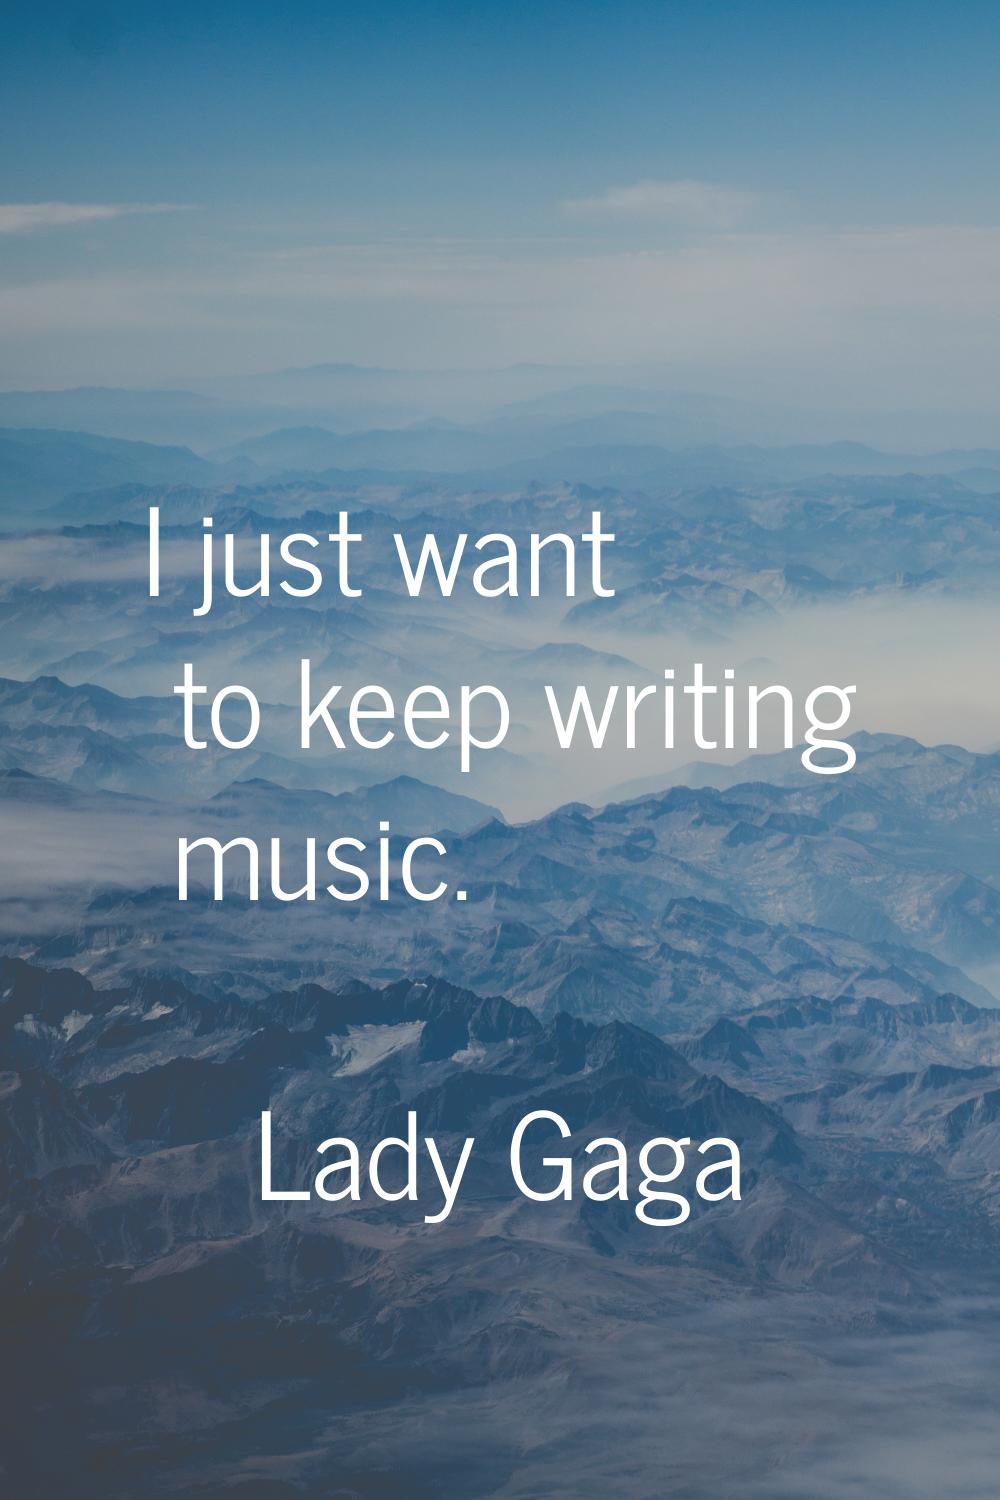 I just want to keep writing music.